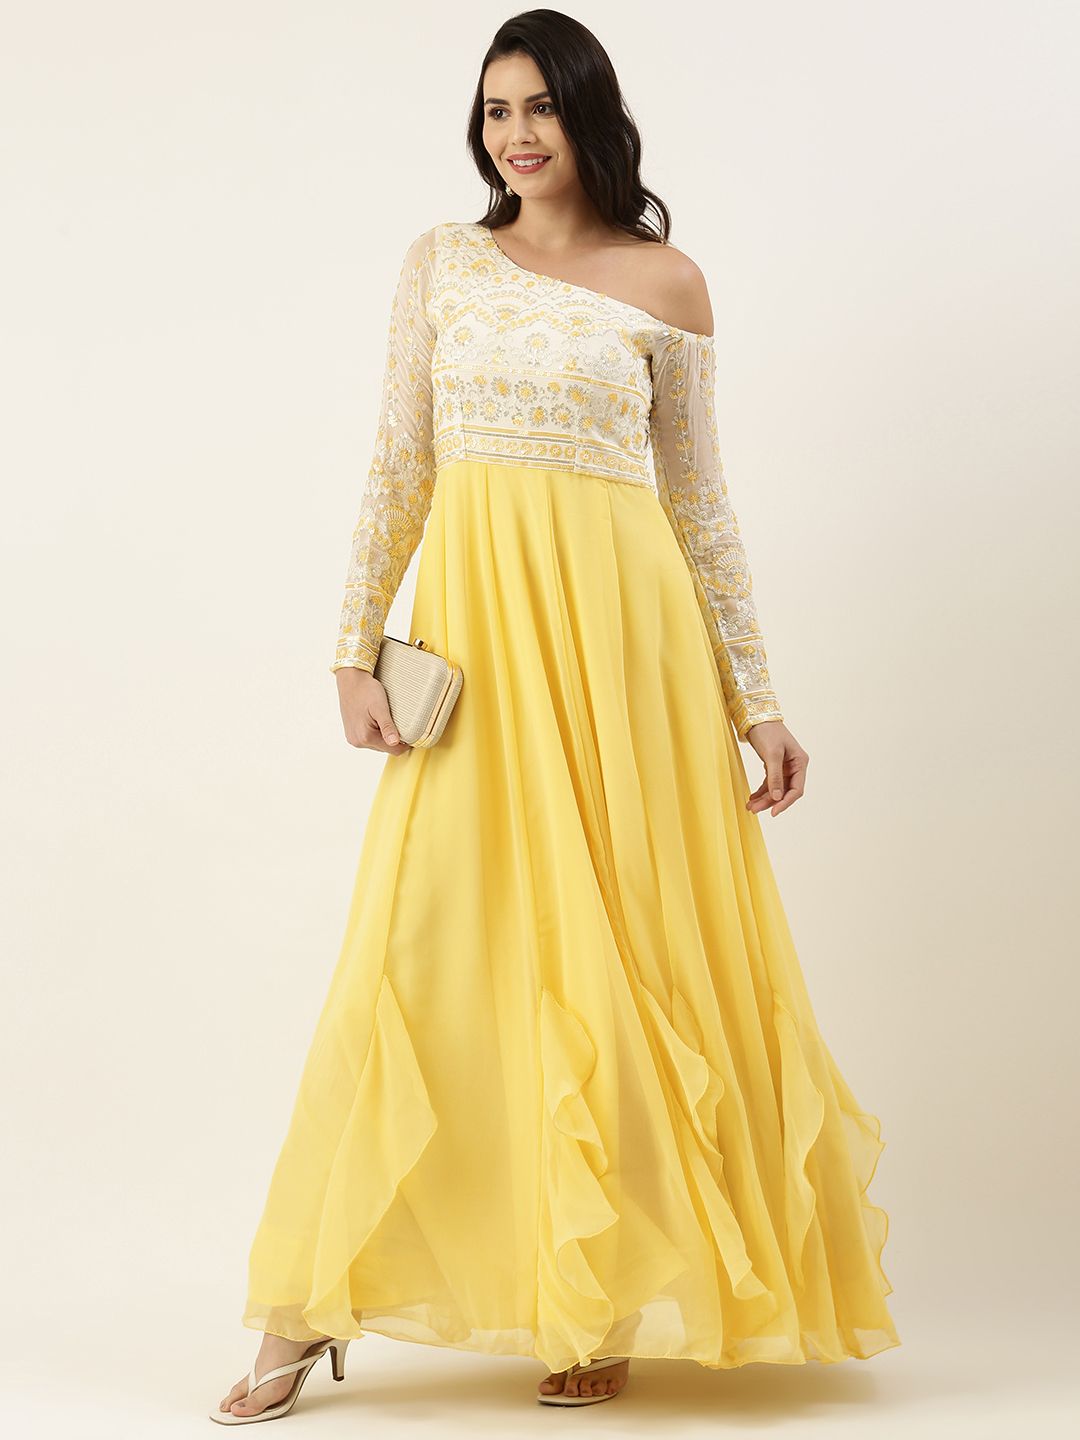 EthnoVogue White & Yellow Floral Embroidered Off-Shoulder Georgette Maxi Dress Price in India